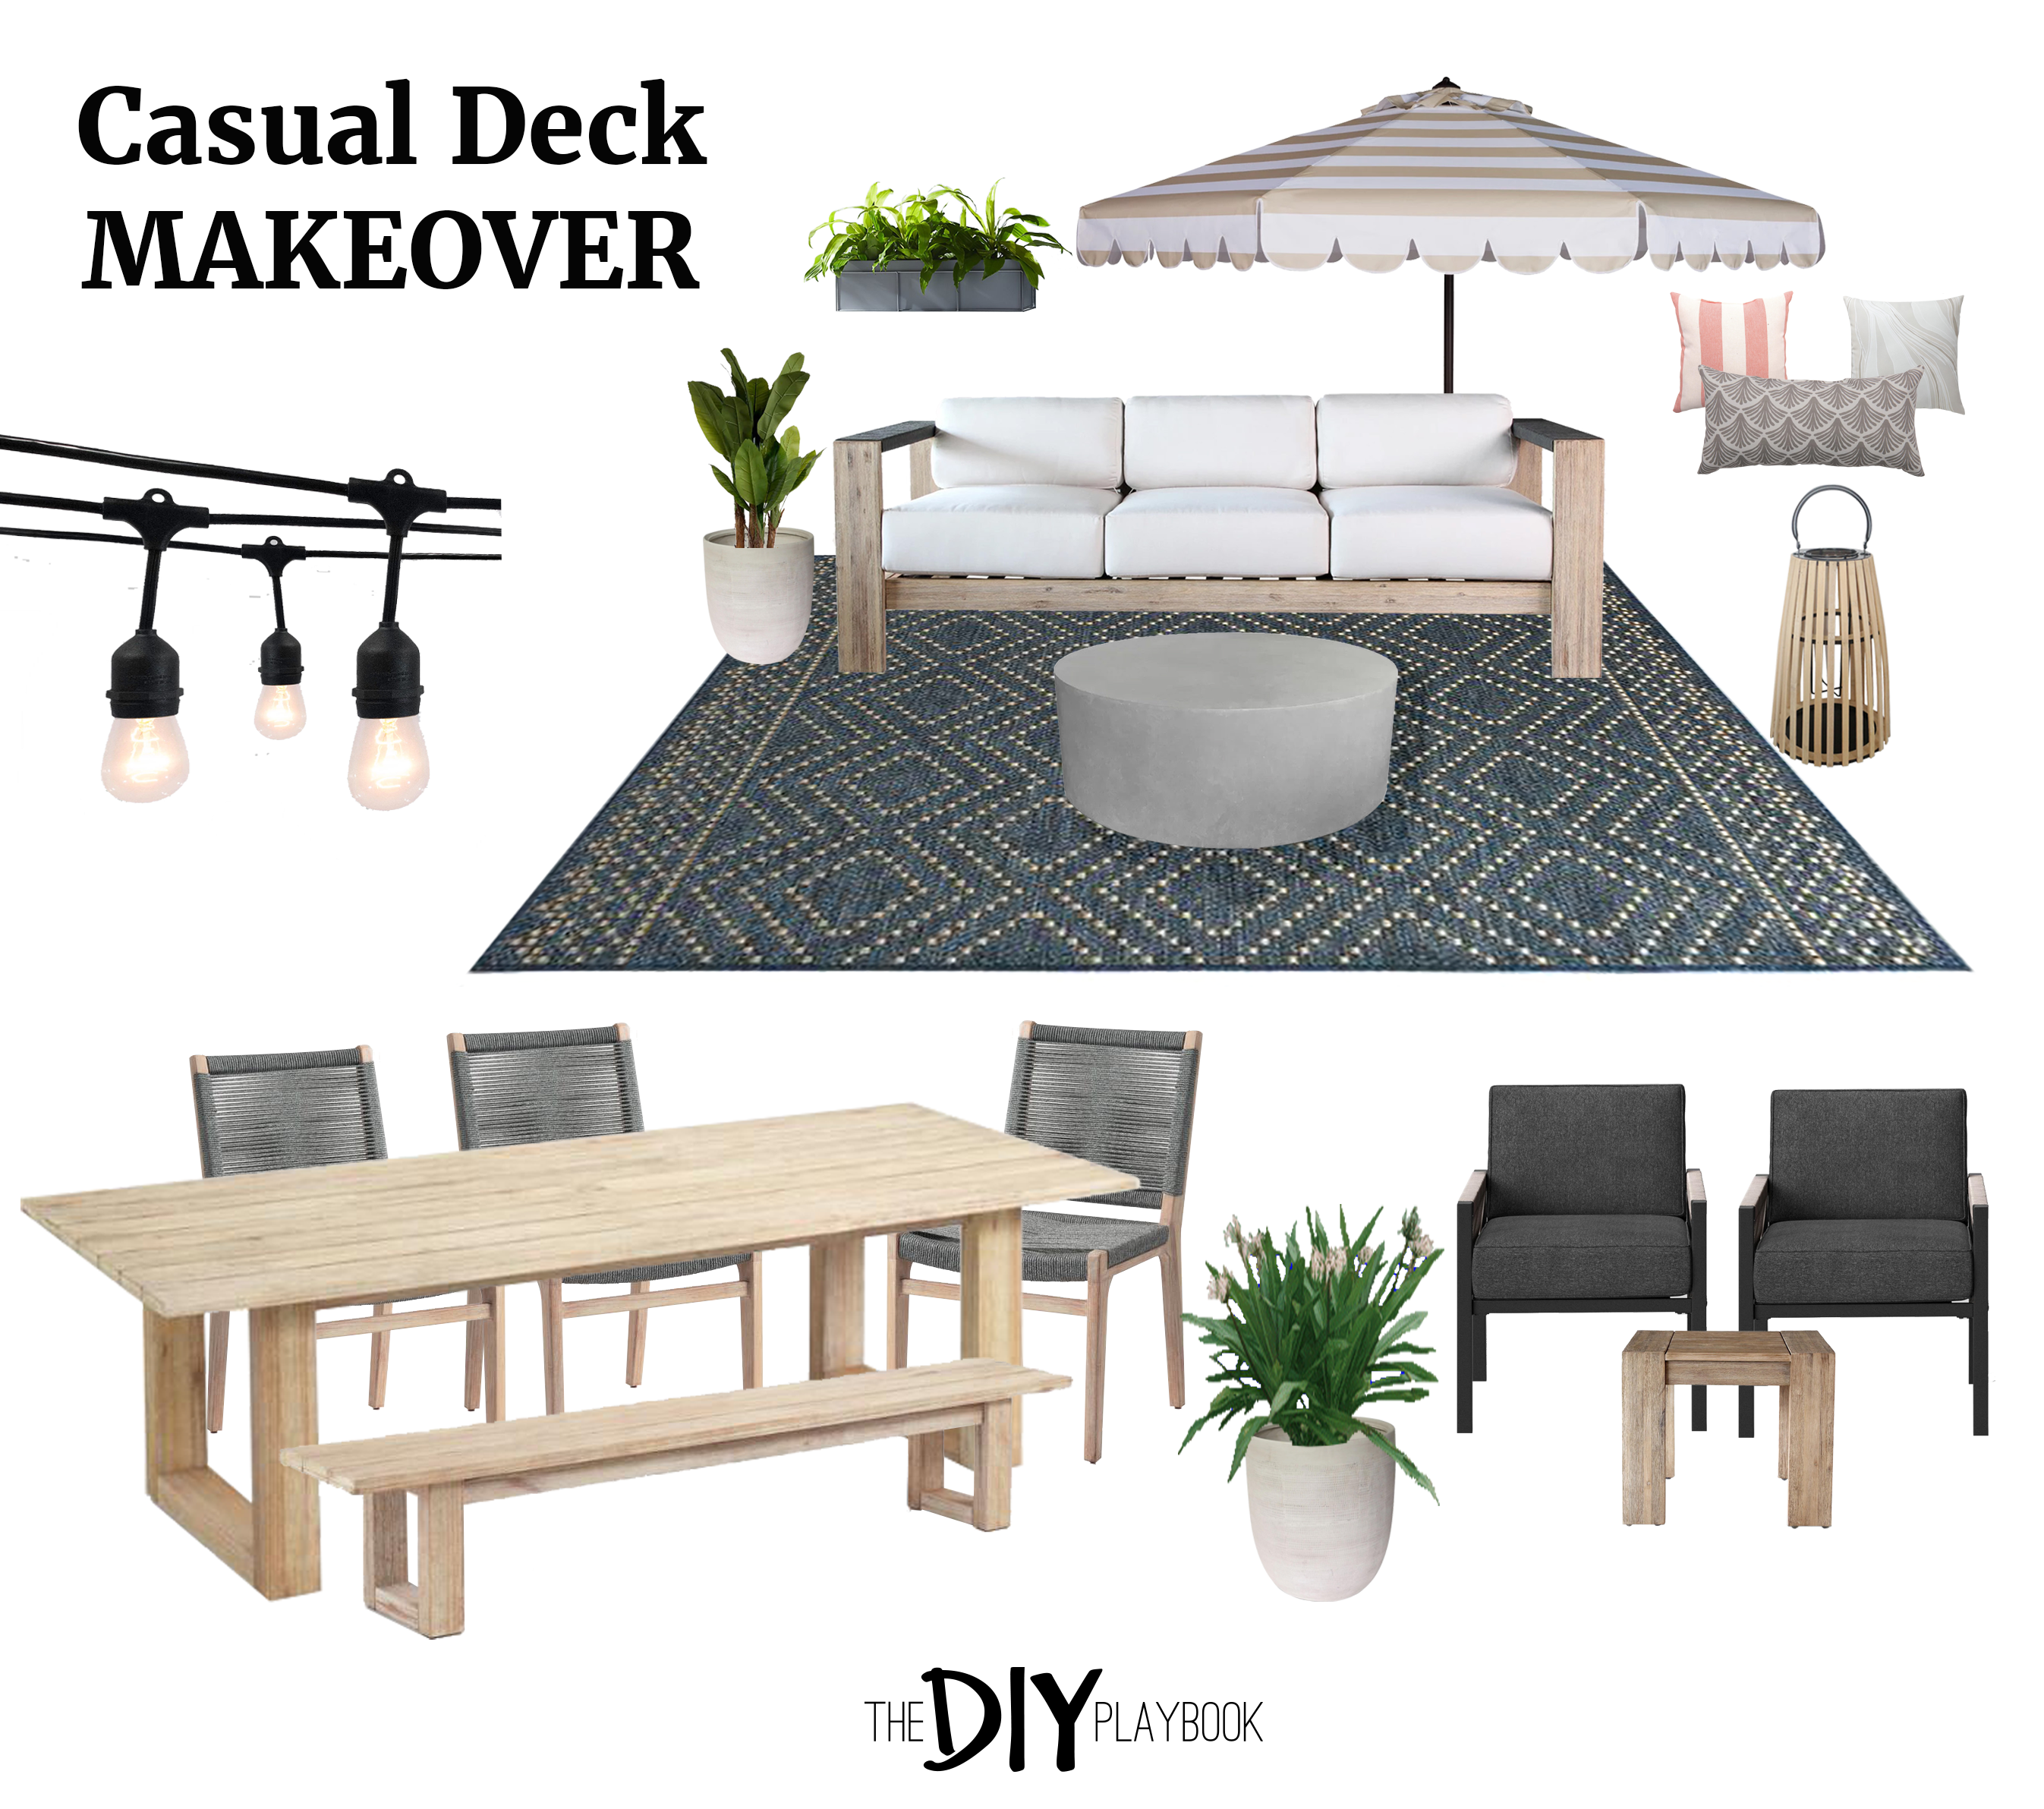 Casual Deck makeover - patio furniture layout mood board